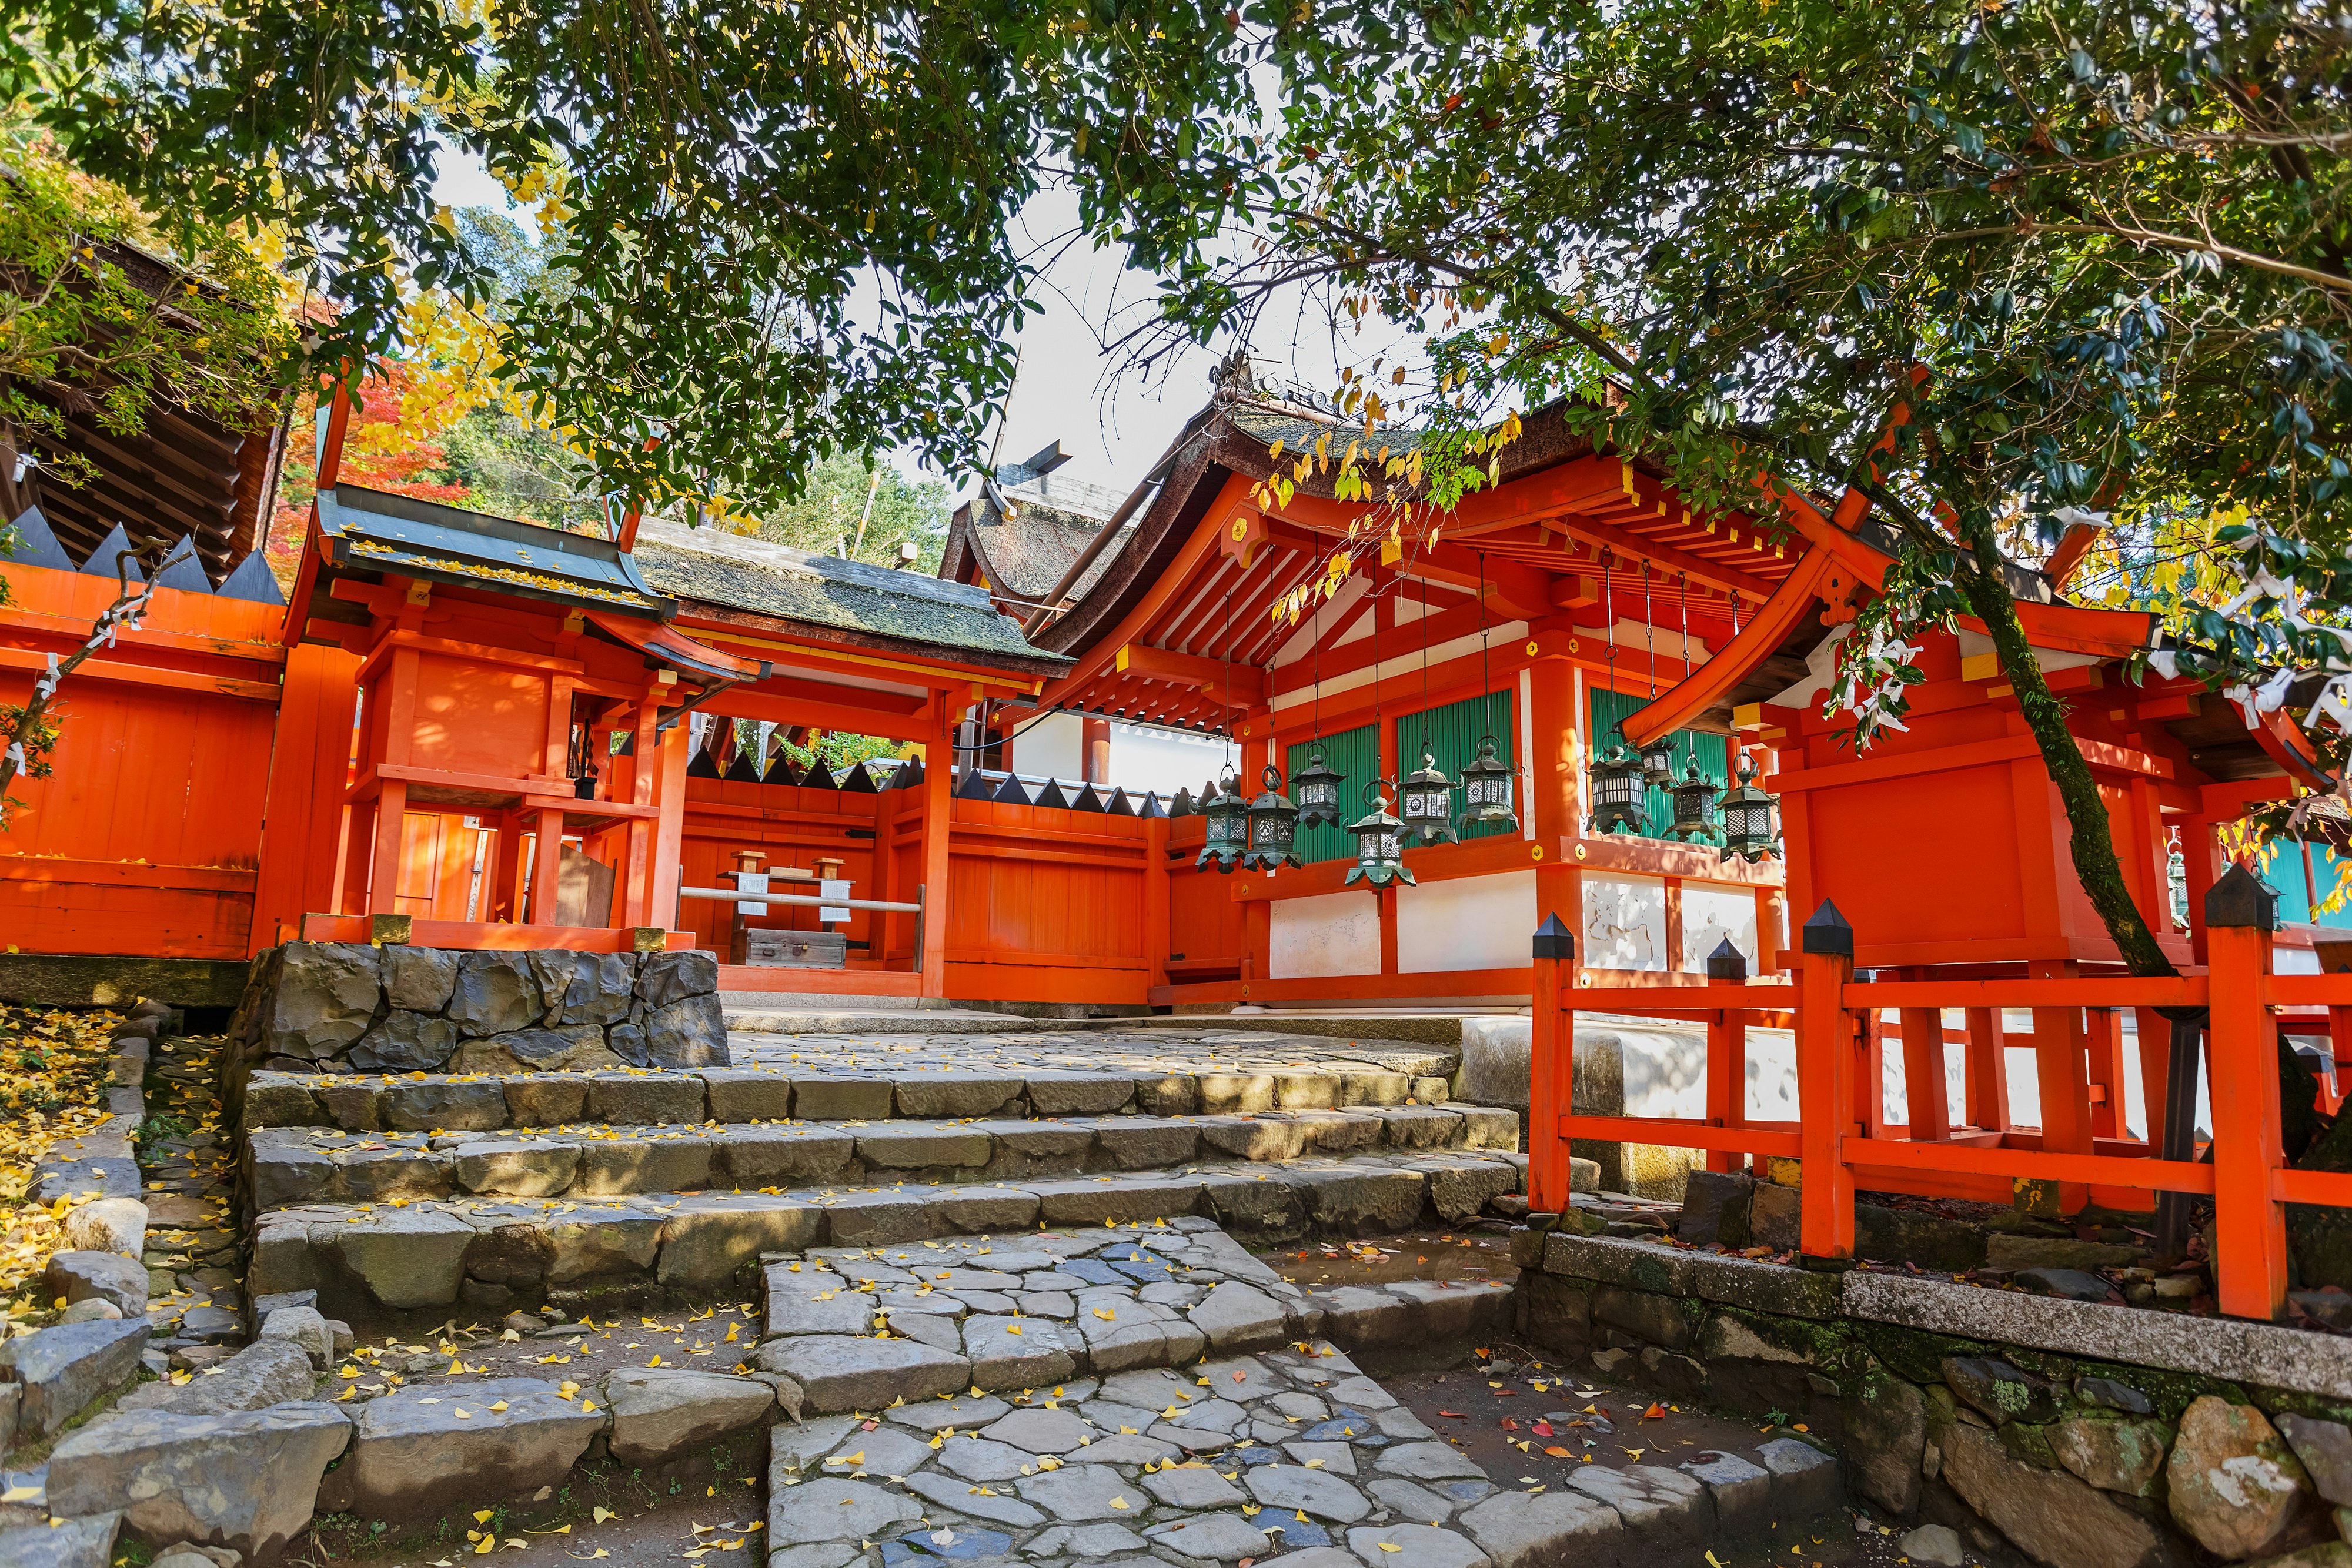 Paved steps leading up to the Kasuga Taisha shrine complex, whose buildings are painted vermilion, with cedar roofs; there is surrounding greenery and some of the walls are lined with lanterns.